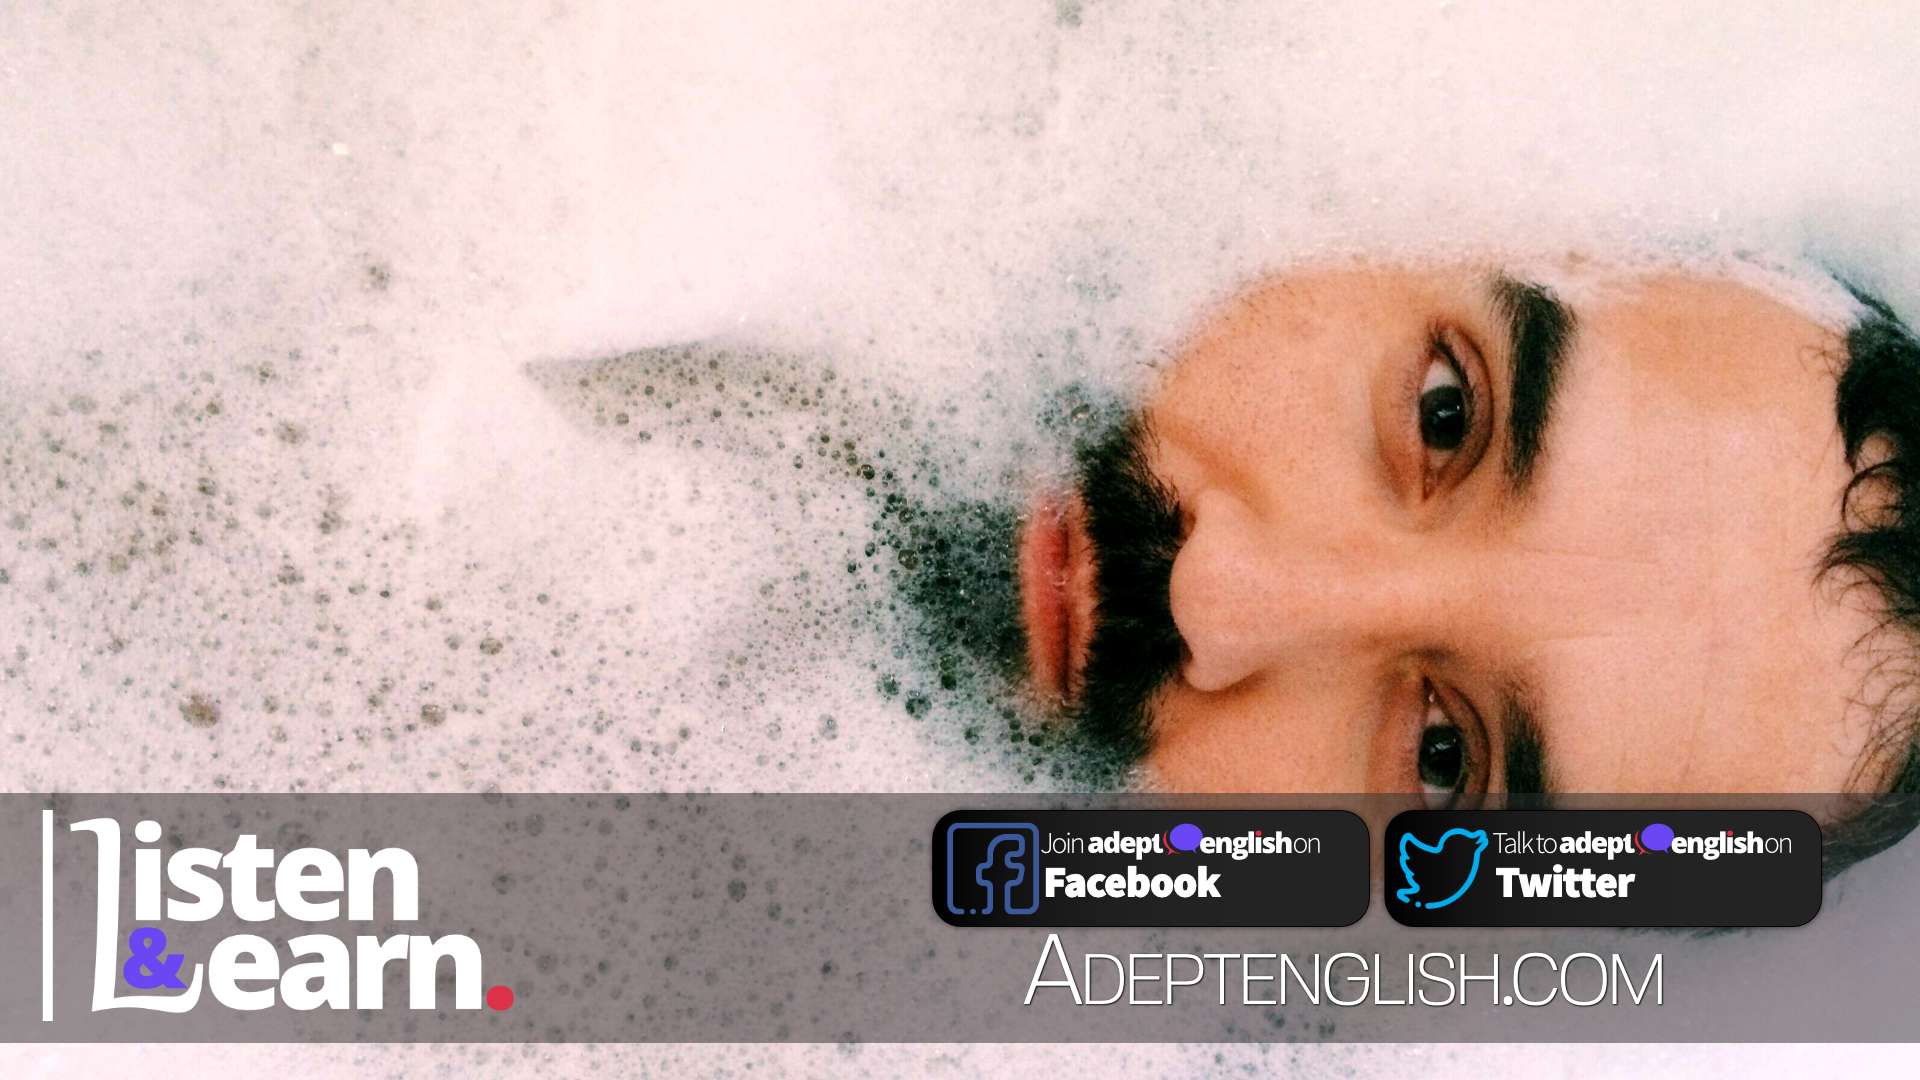 A bearded man in a bath surrounded with bubbles. Archimedes supposedly had his eureka moment in a bath.